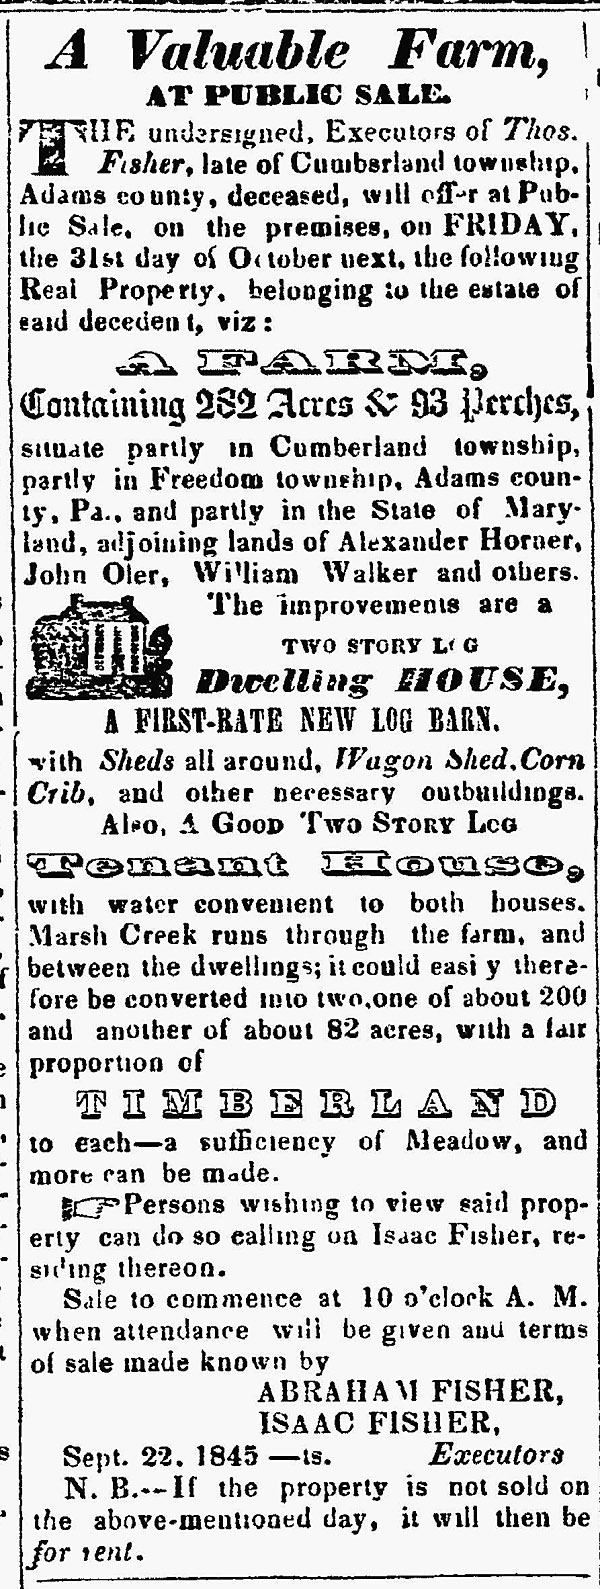 Newspaper notice of the Estate Sale for Thomas Fisher's Farm, found in the Repubican Compliler, Gettysburgh, Pennsylvania, September 22, 1845